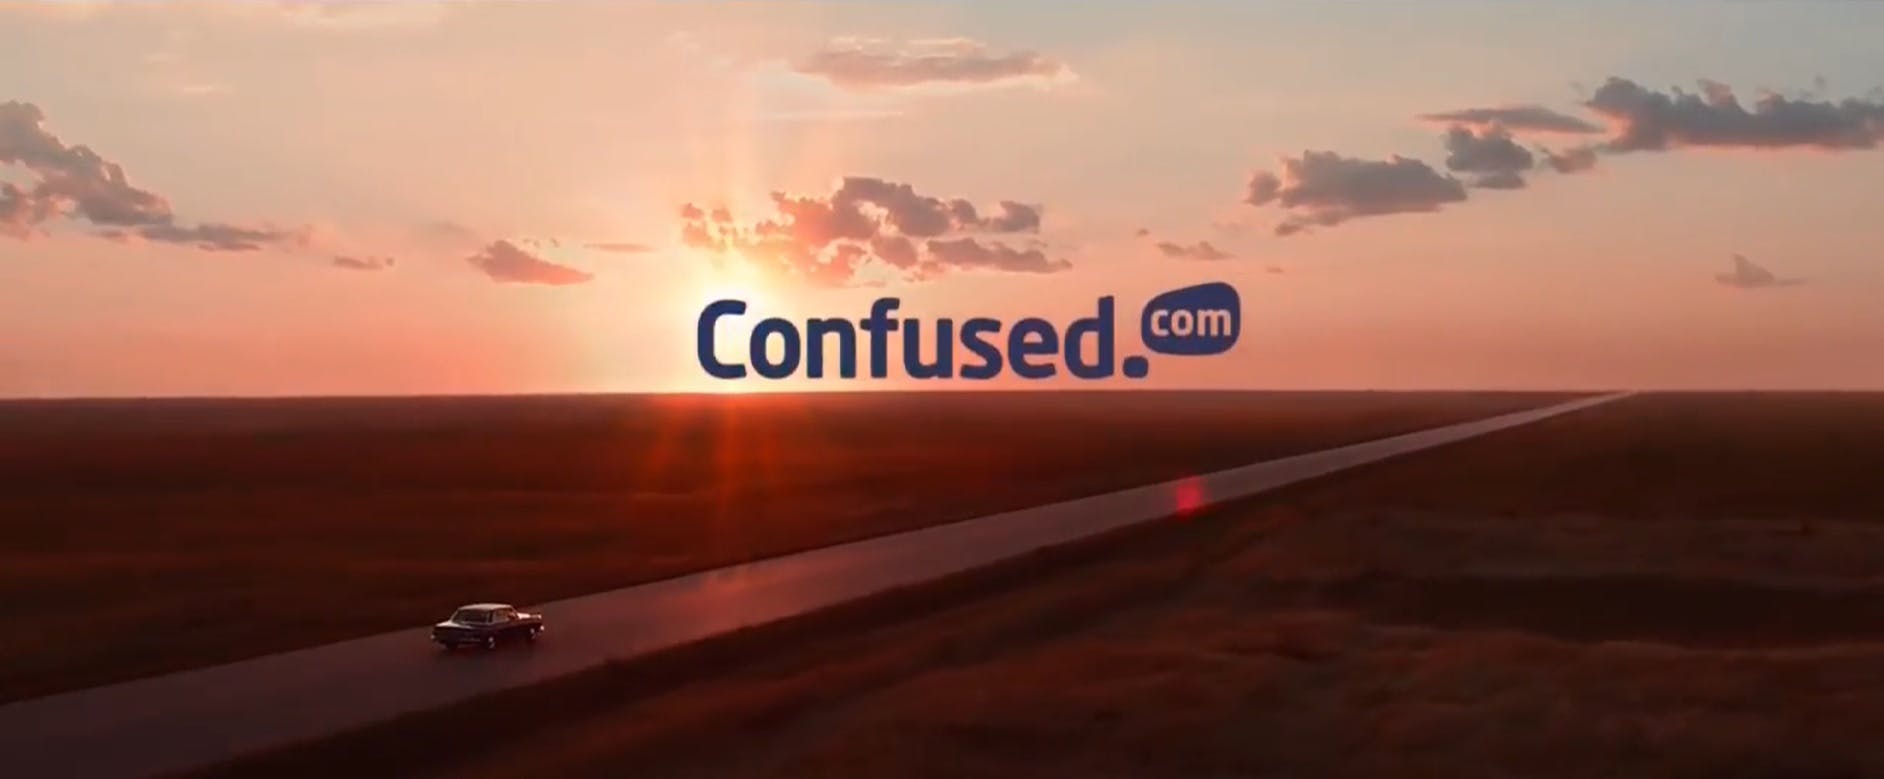 How Confusedcom rebuilt its brand through customer insight doing things differently and taking a long term view